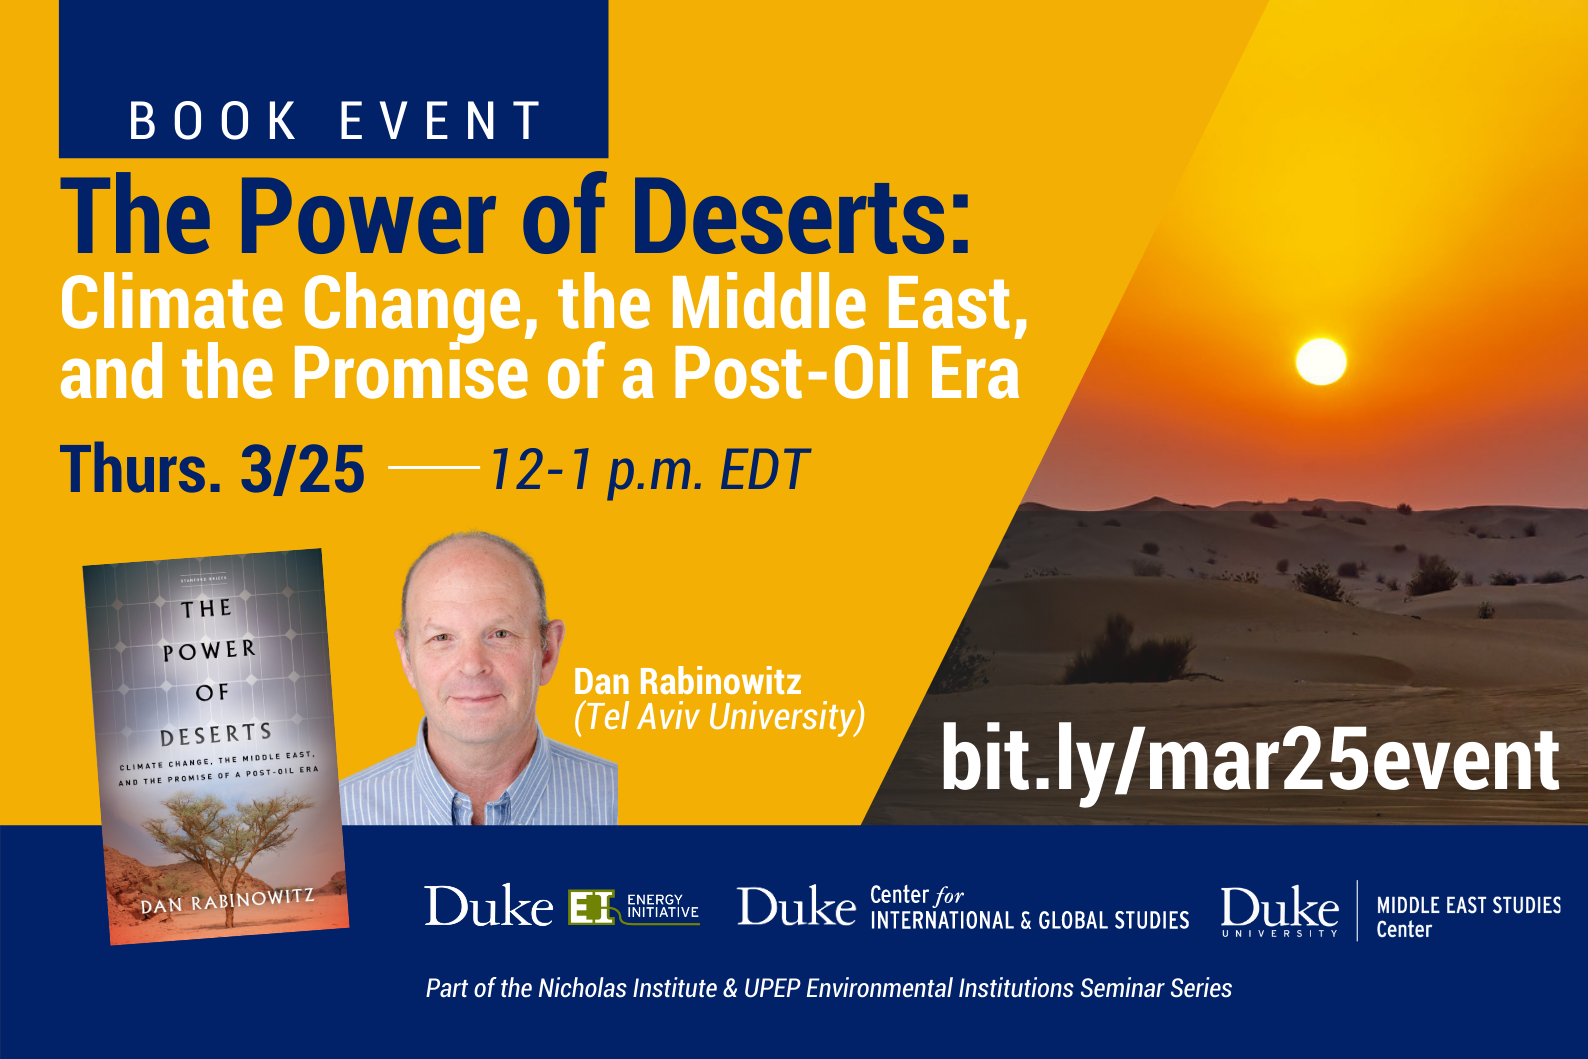 Text: "The Power of Deserts: Climate Change, the Middle East, and the Promise of a Post Oil Era" "Thurs. 3/25 12-1 p.m. EDT" bit.ly/mar25talk "Part of the Nicholas Institute and UPEP Environmental Institutions Seminar Series. A cover of the book sits next to a headshot of Dan Rabinowitz on an orange background. A sun sets on a desert on the righthand side of the image. Logos for the EI, DUCIGS, and DUMESC sit below the registration link.